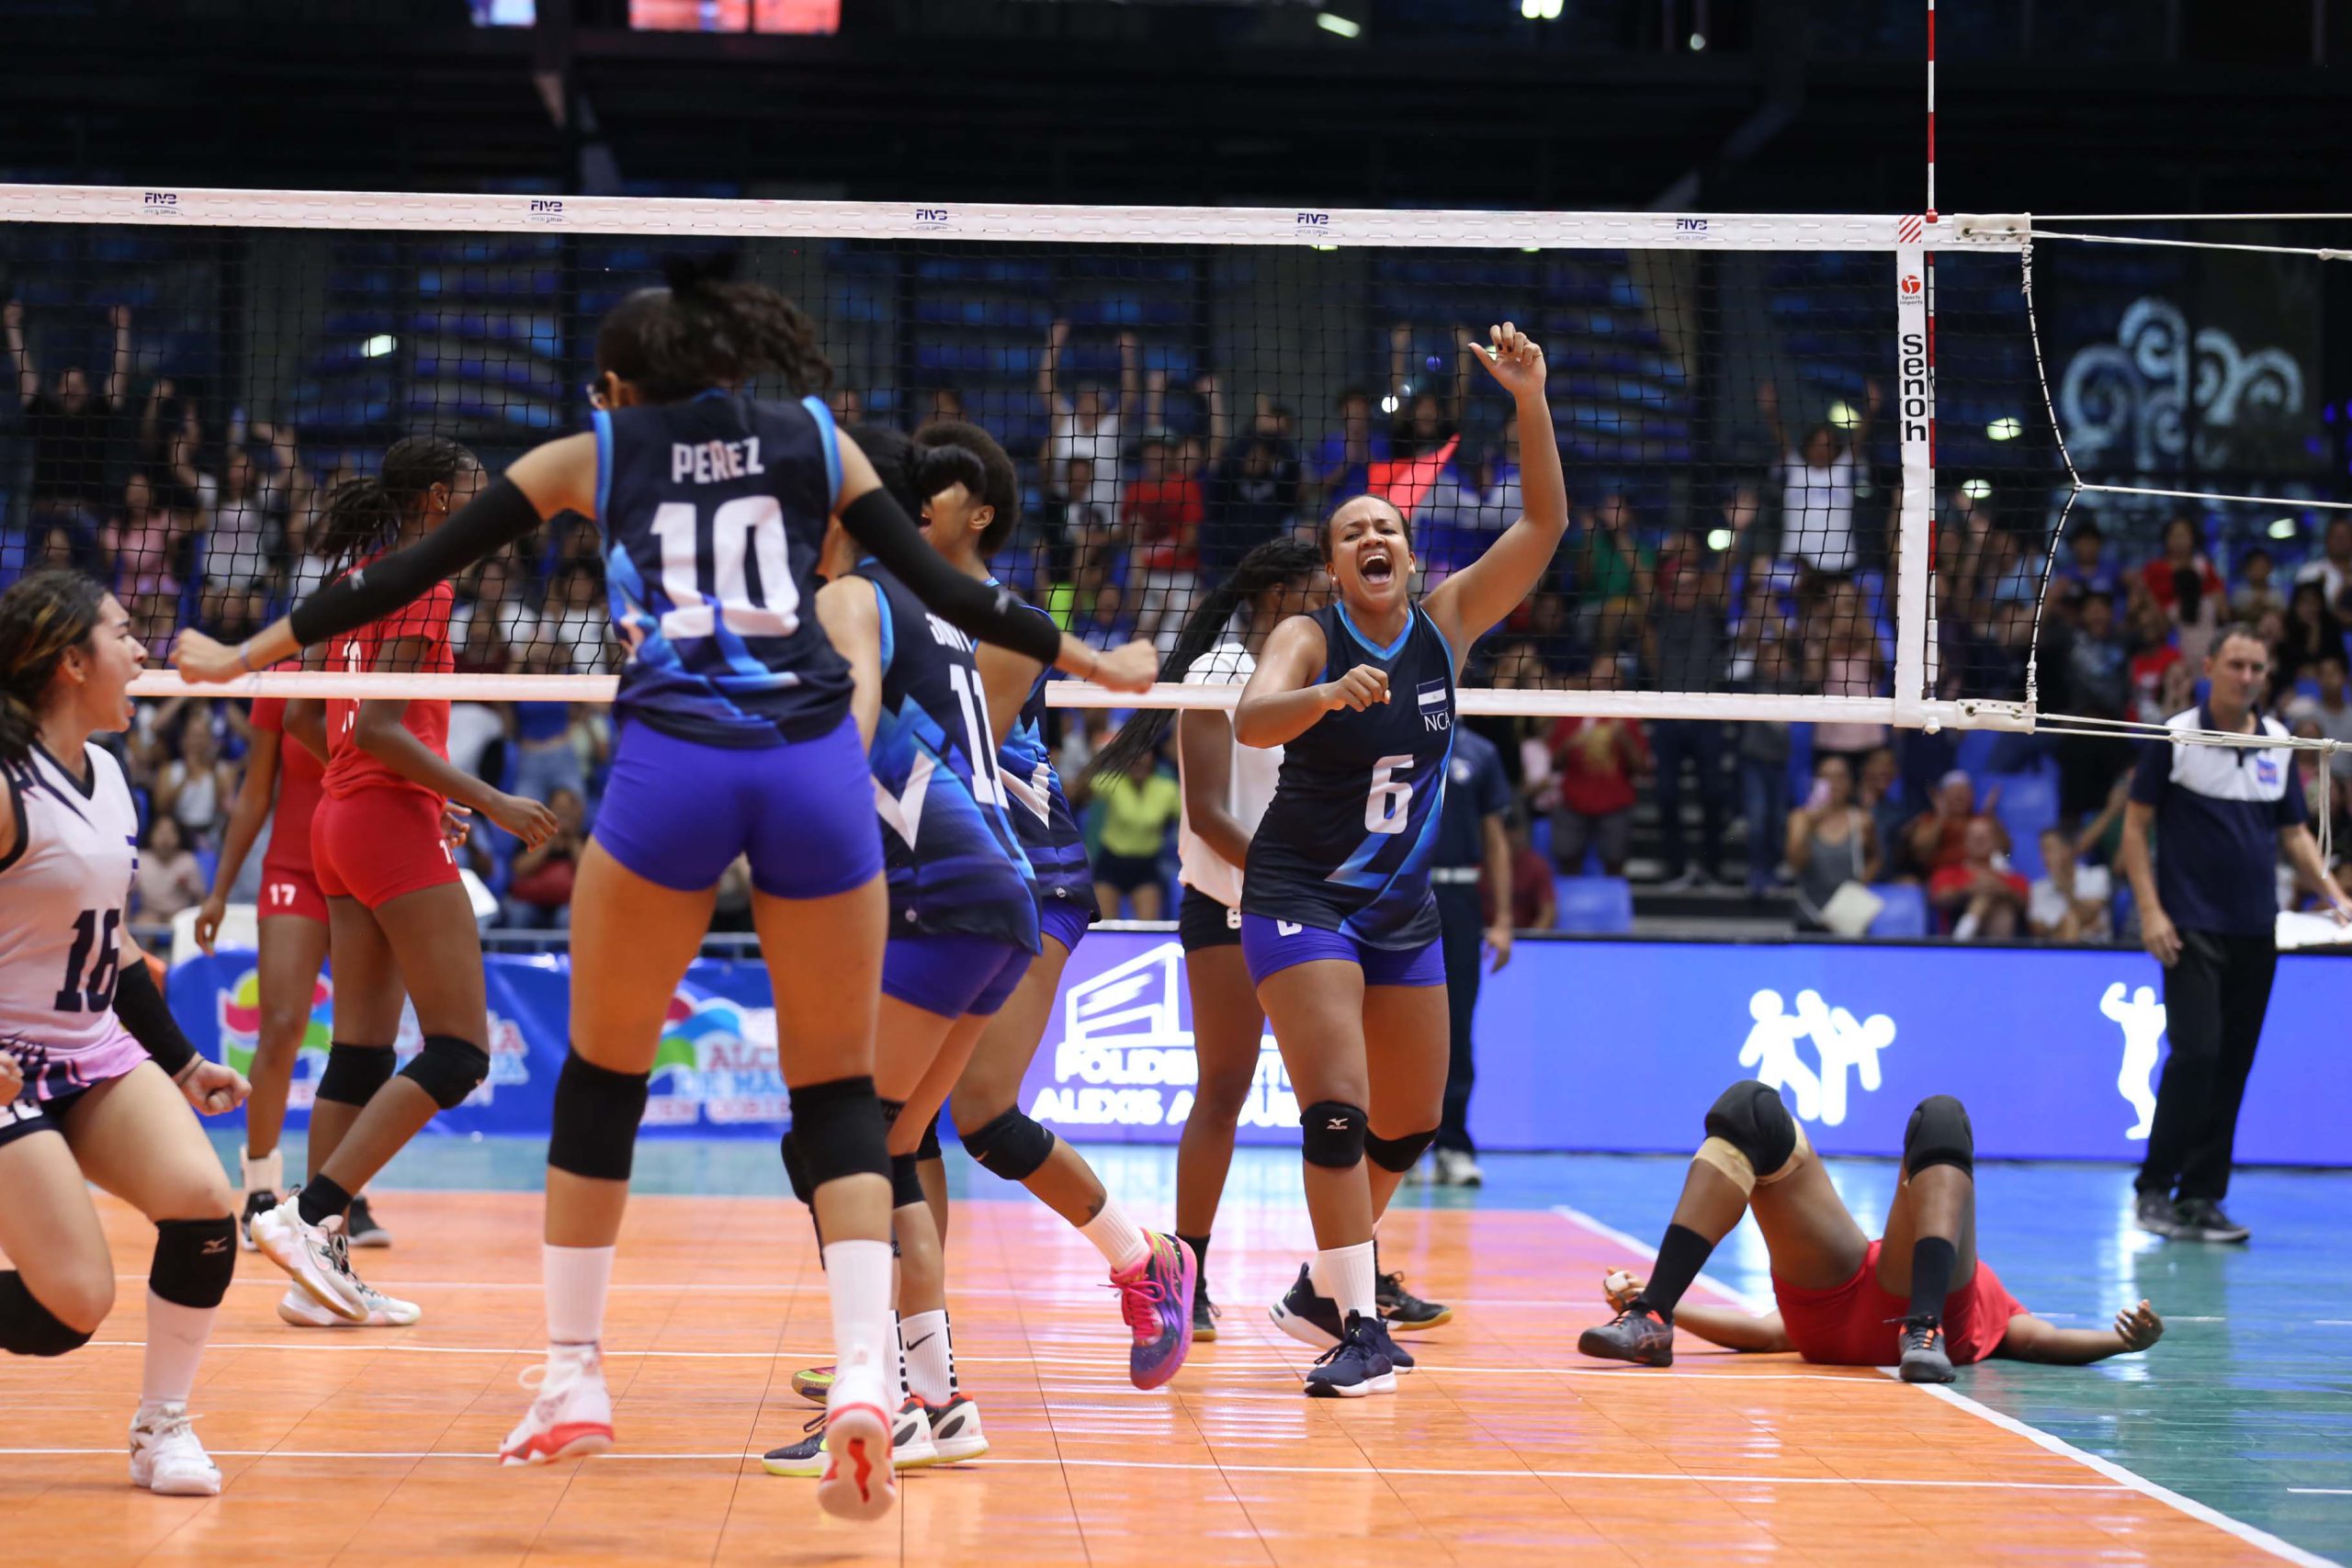 Nicaragua claims the bronze medal defeating Belize 3-0